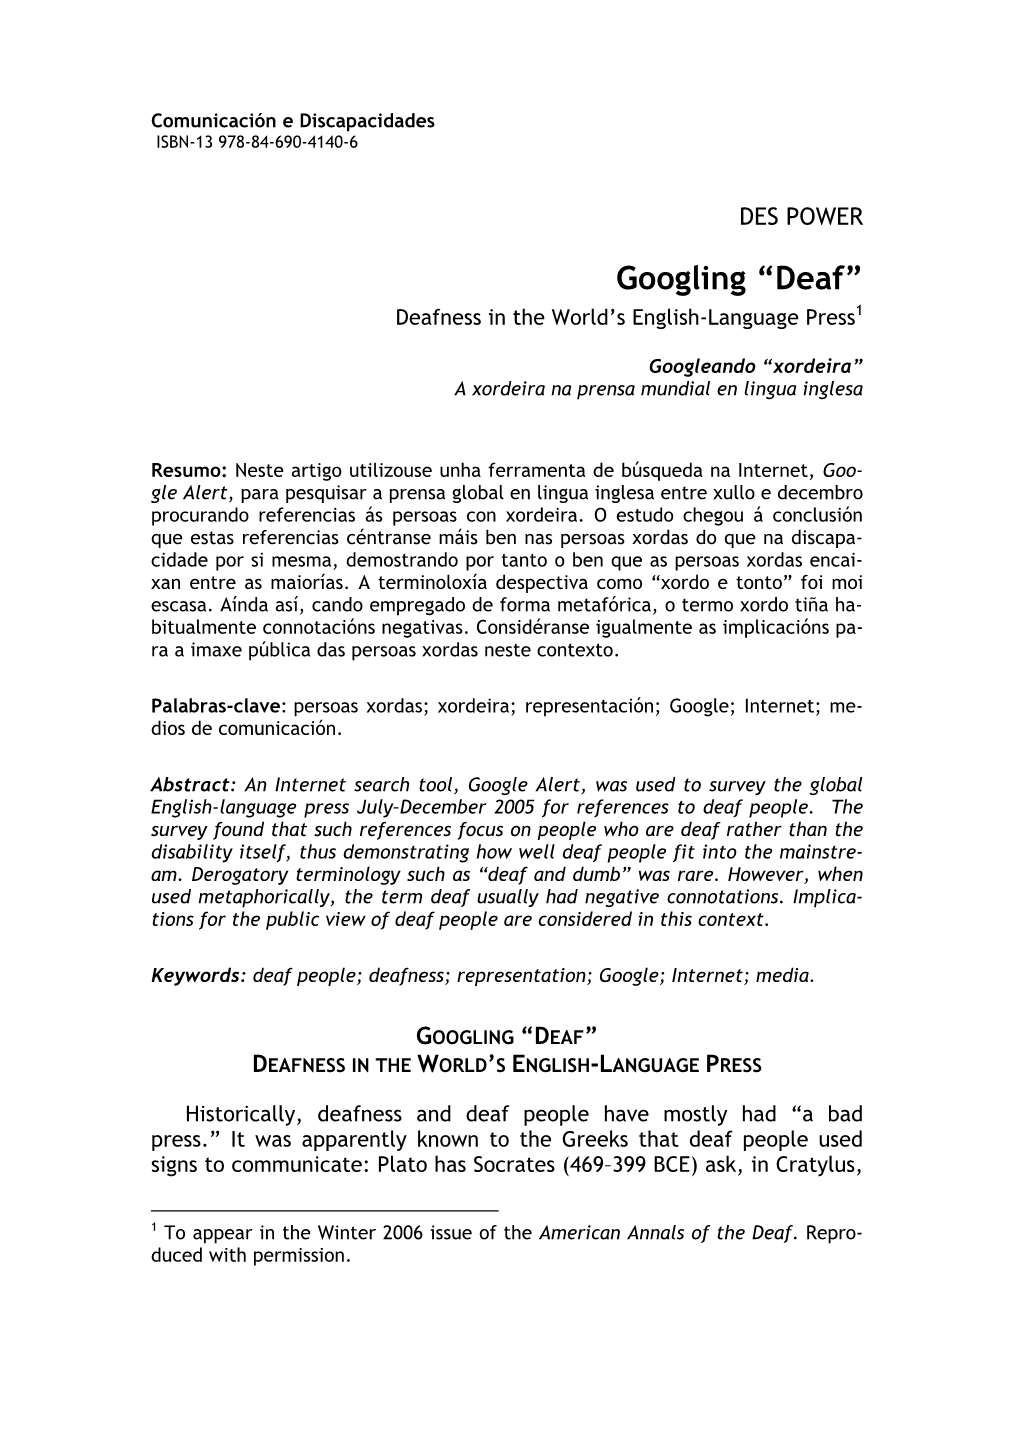 Googling “Deaf” Deafness in the World’S English-Language Press1